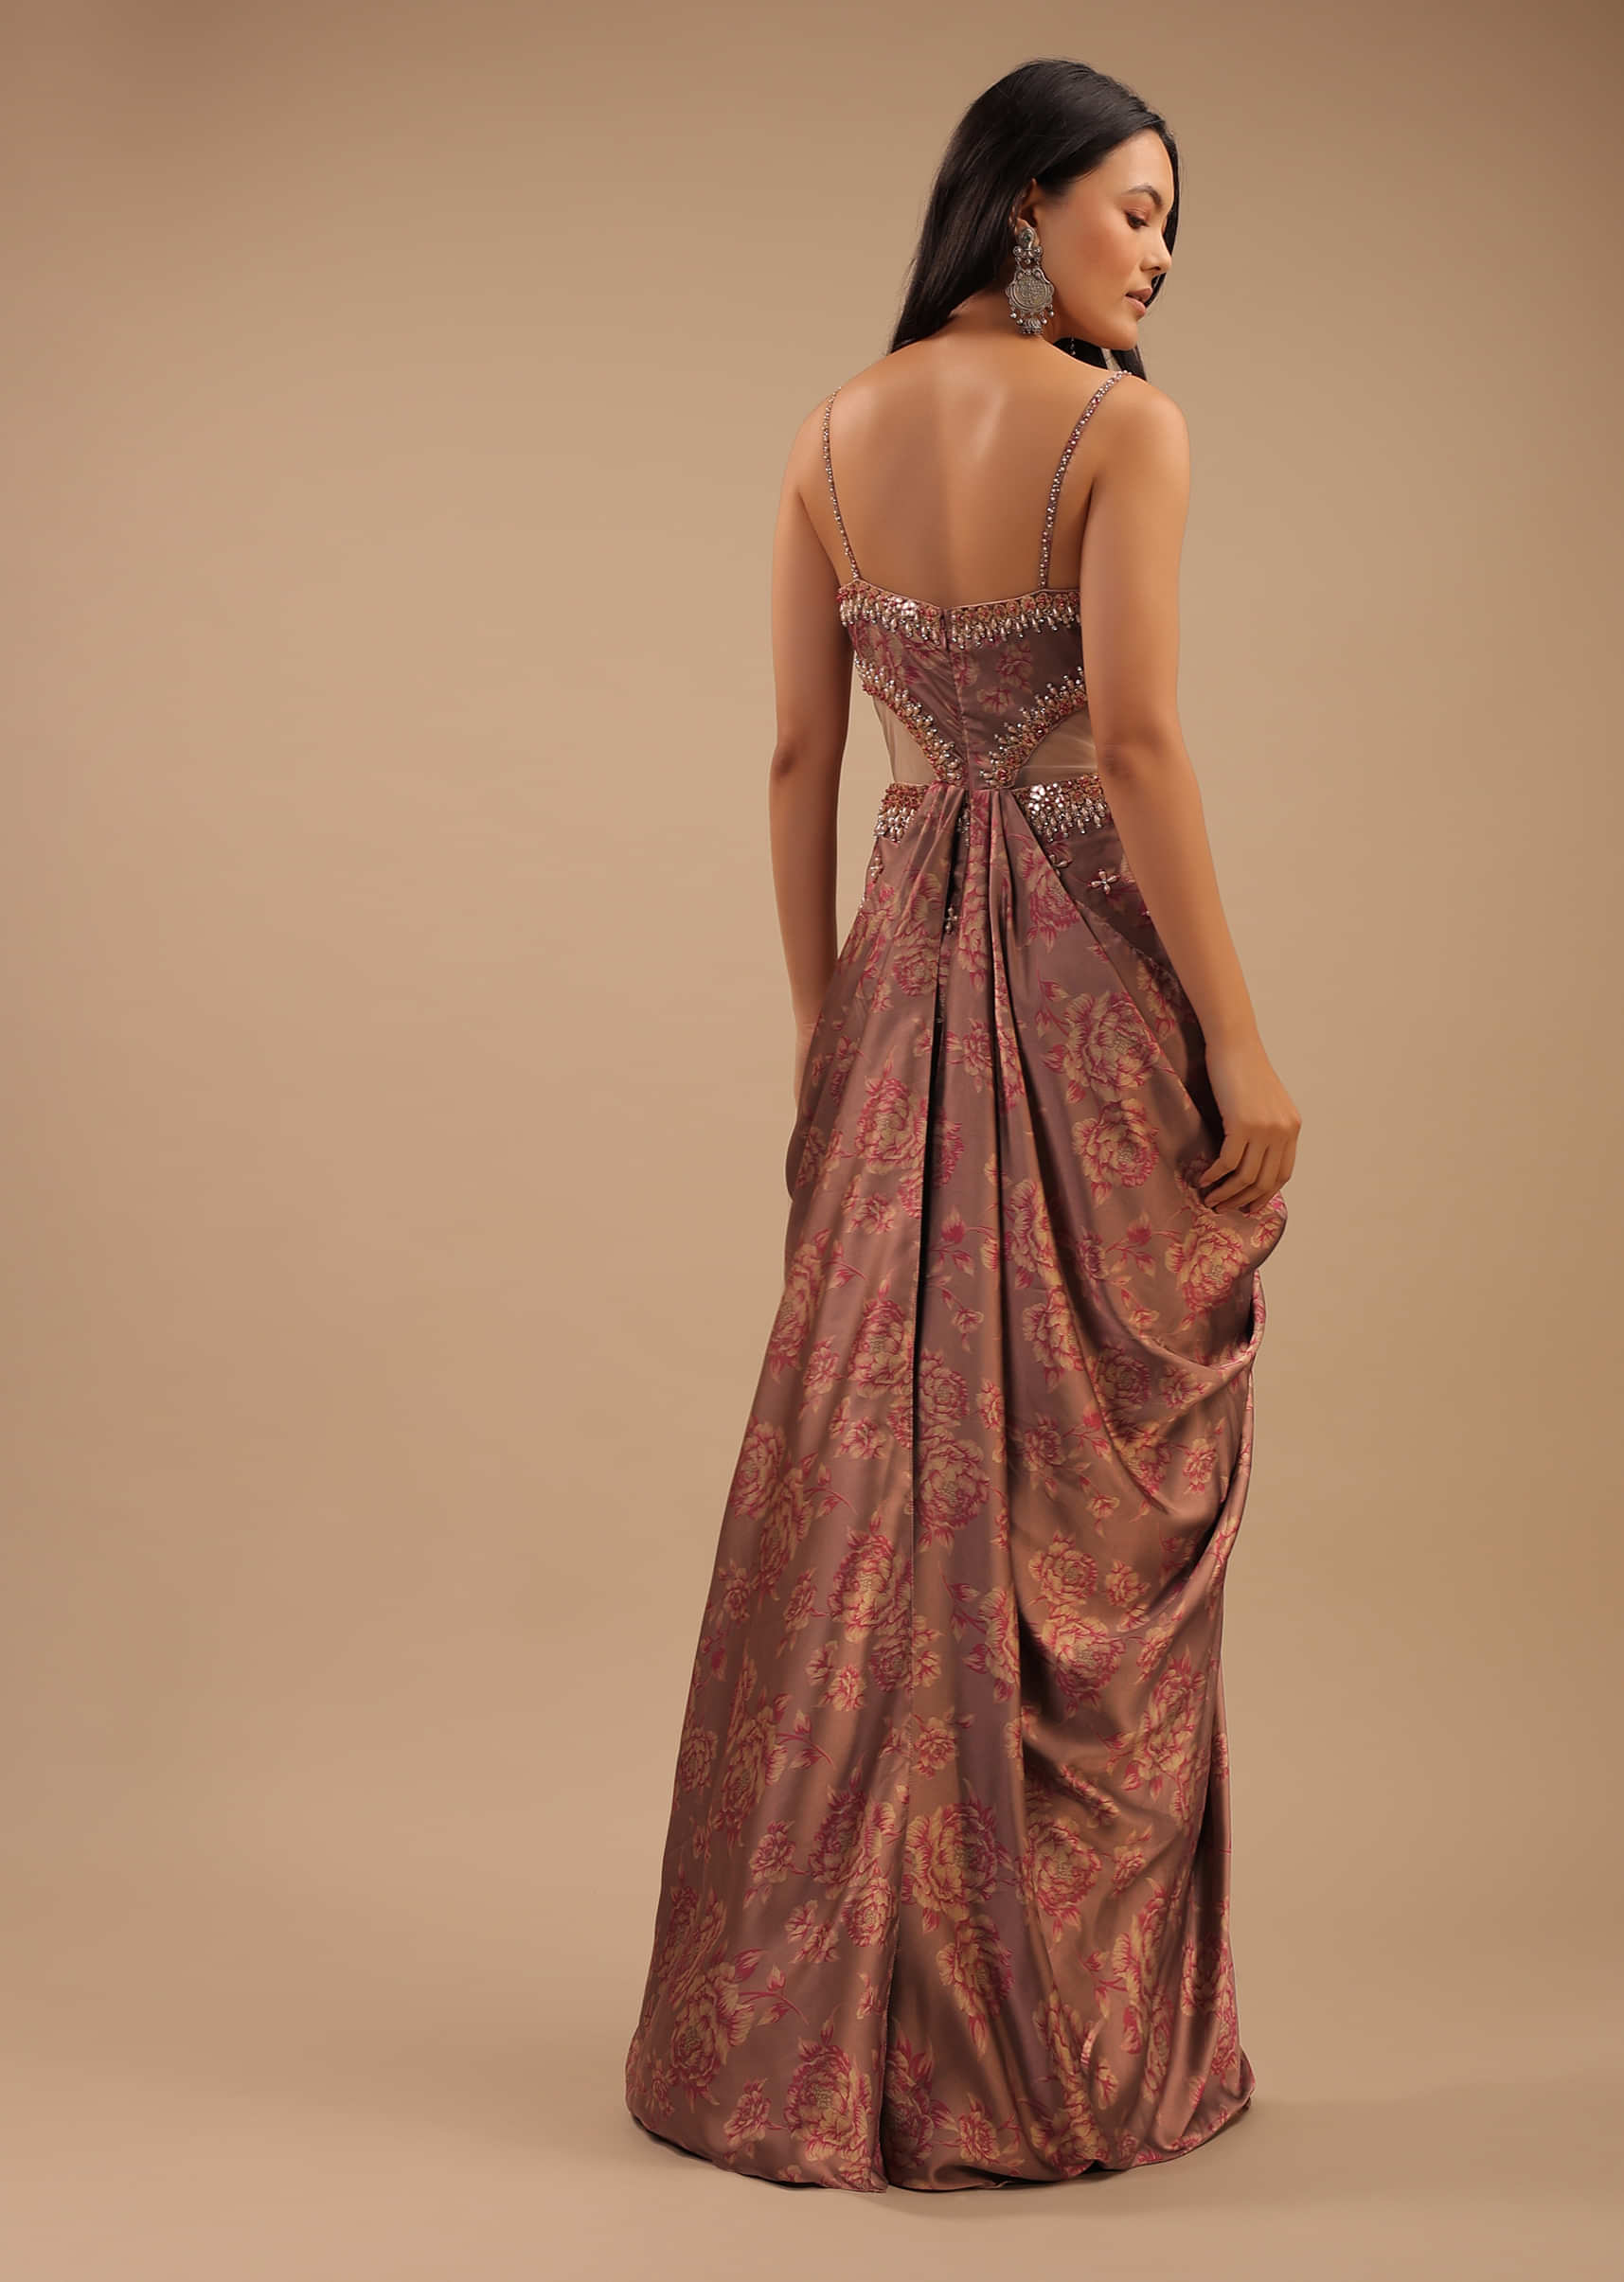 Peach Pink Satin Sharara Jumpsuit With Floral Print And Cowl Drape On The Waist